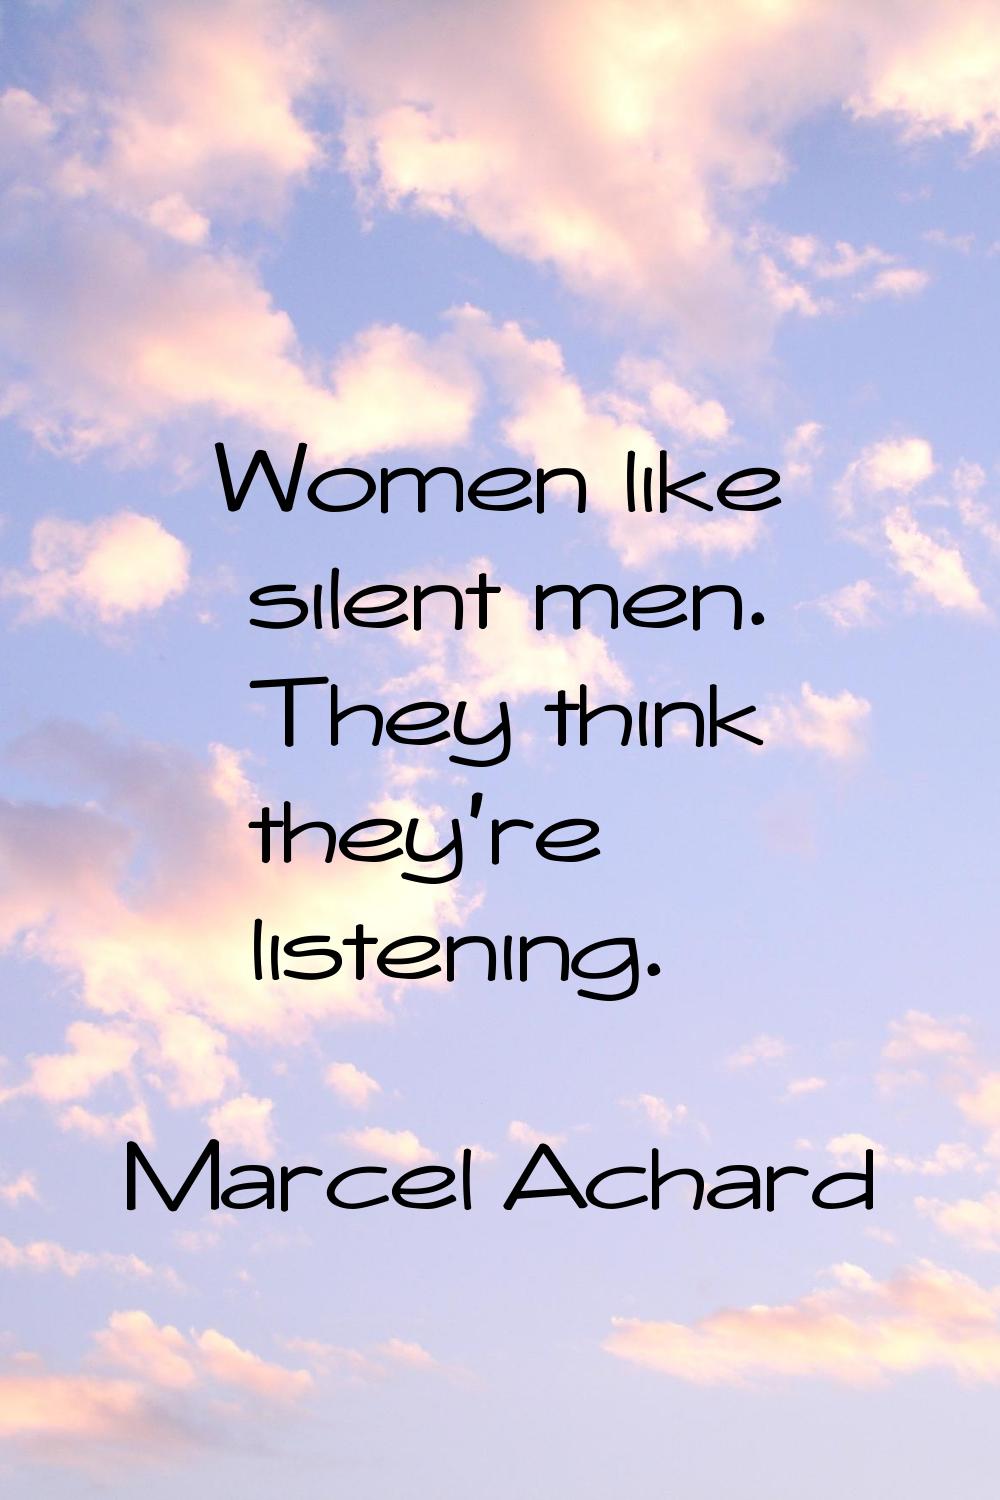 Women like silent men. They think they're listening.